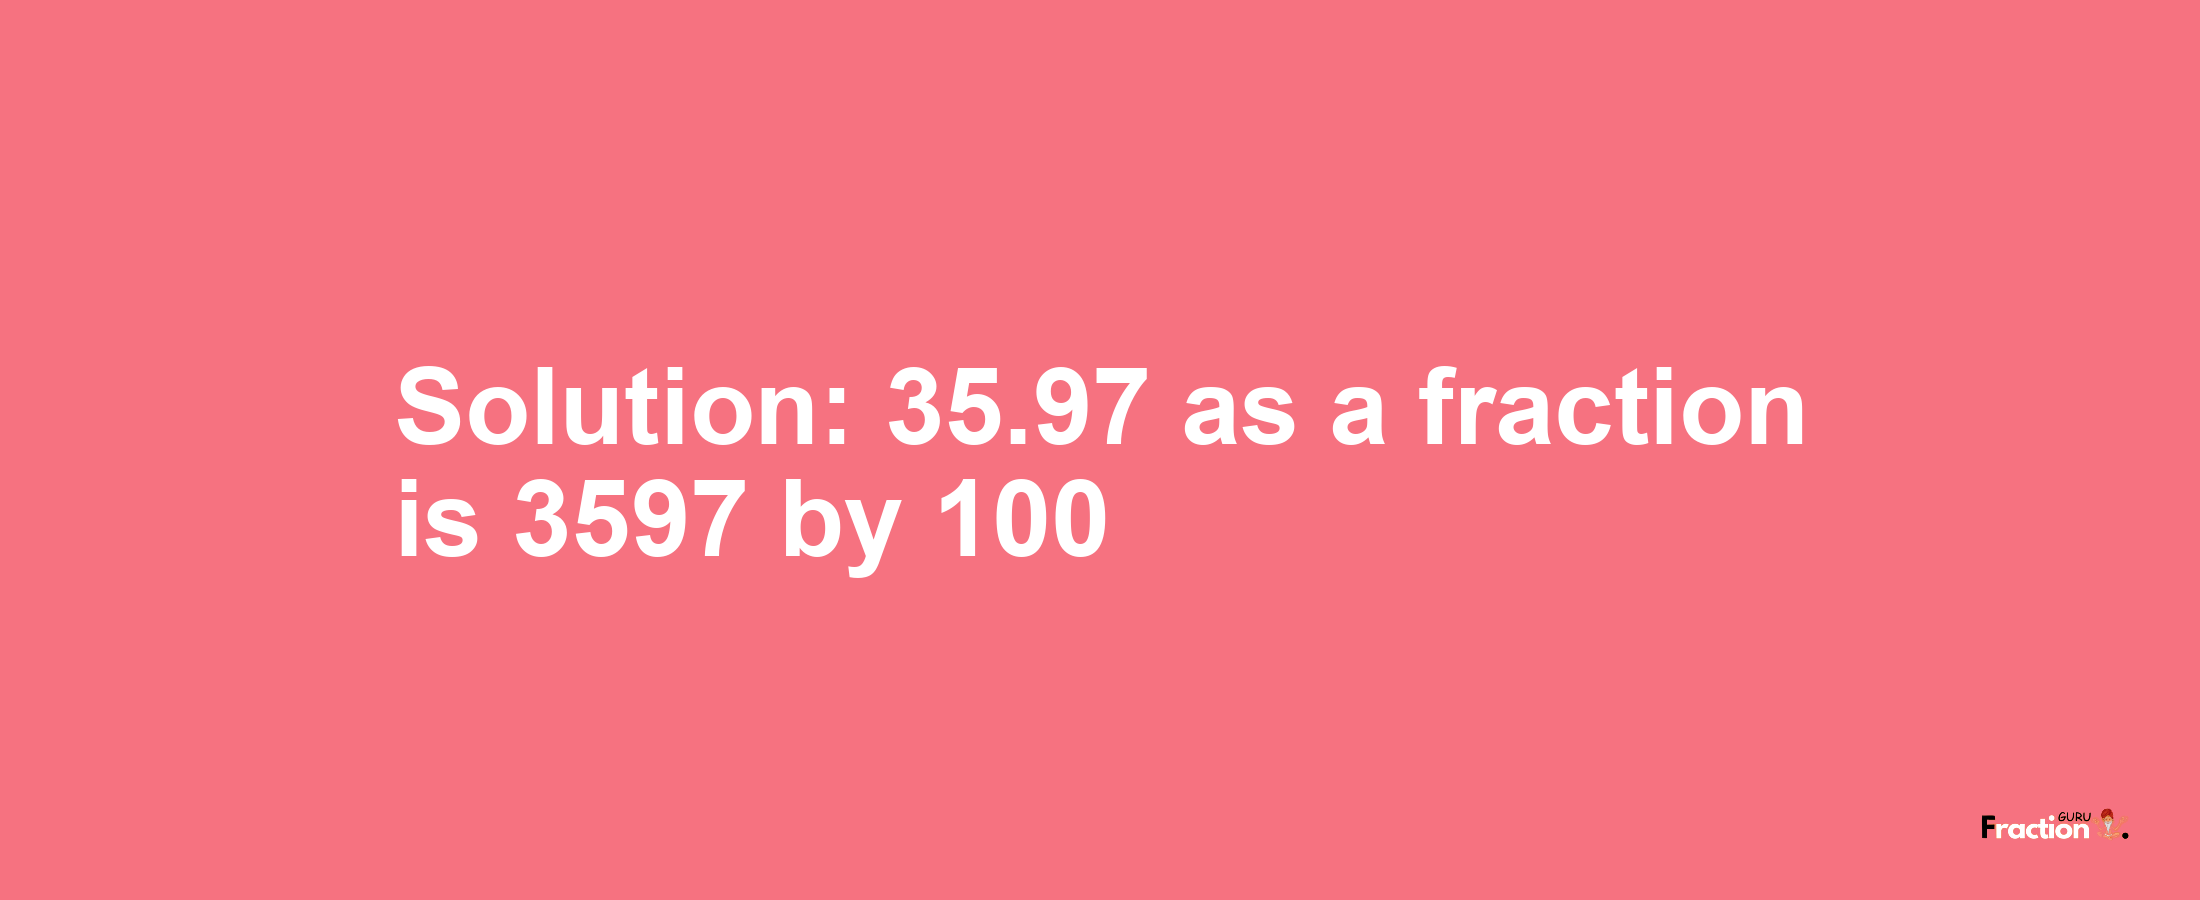 Solution:35.97 as a fraction is 3597/100